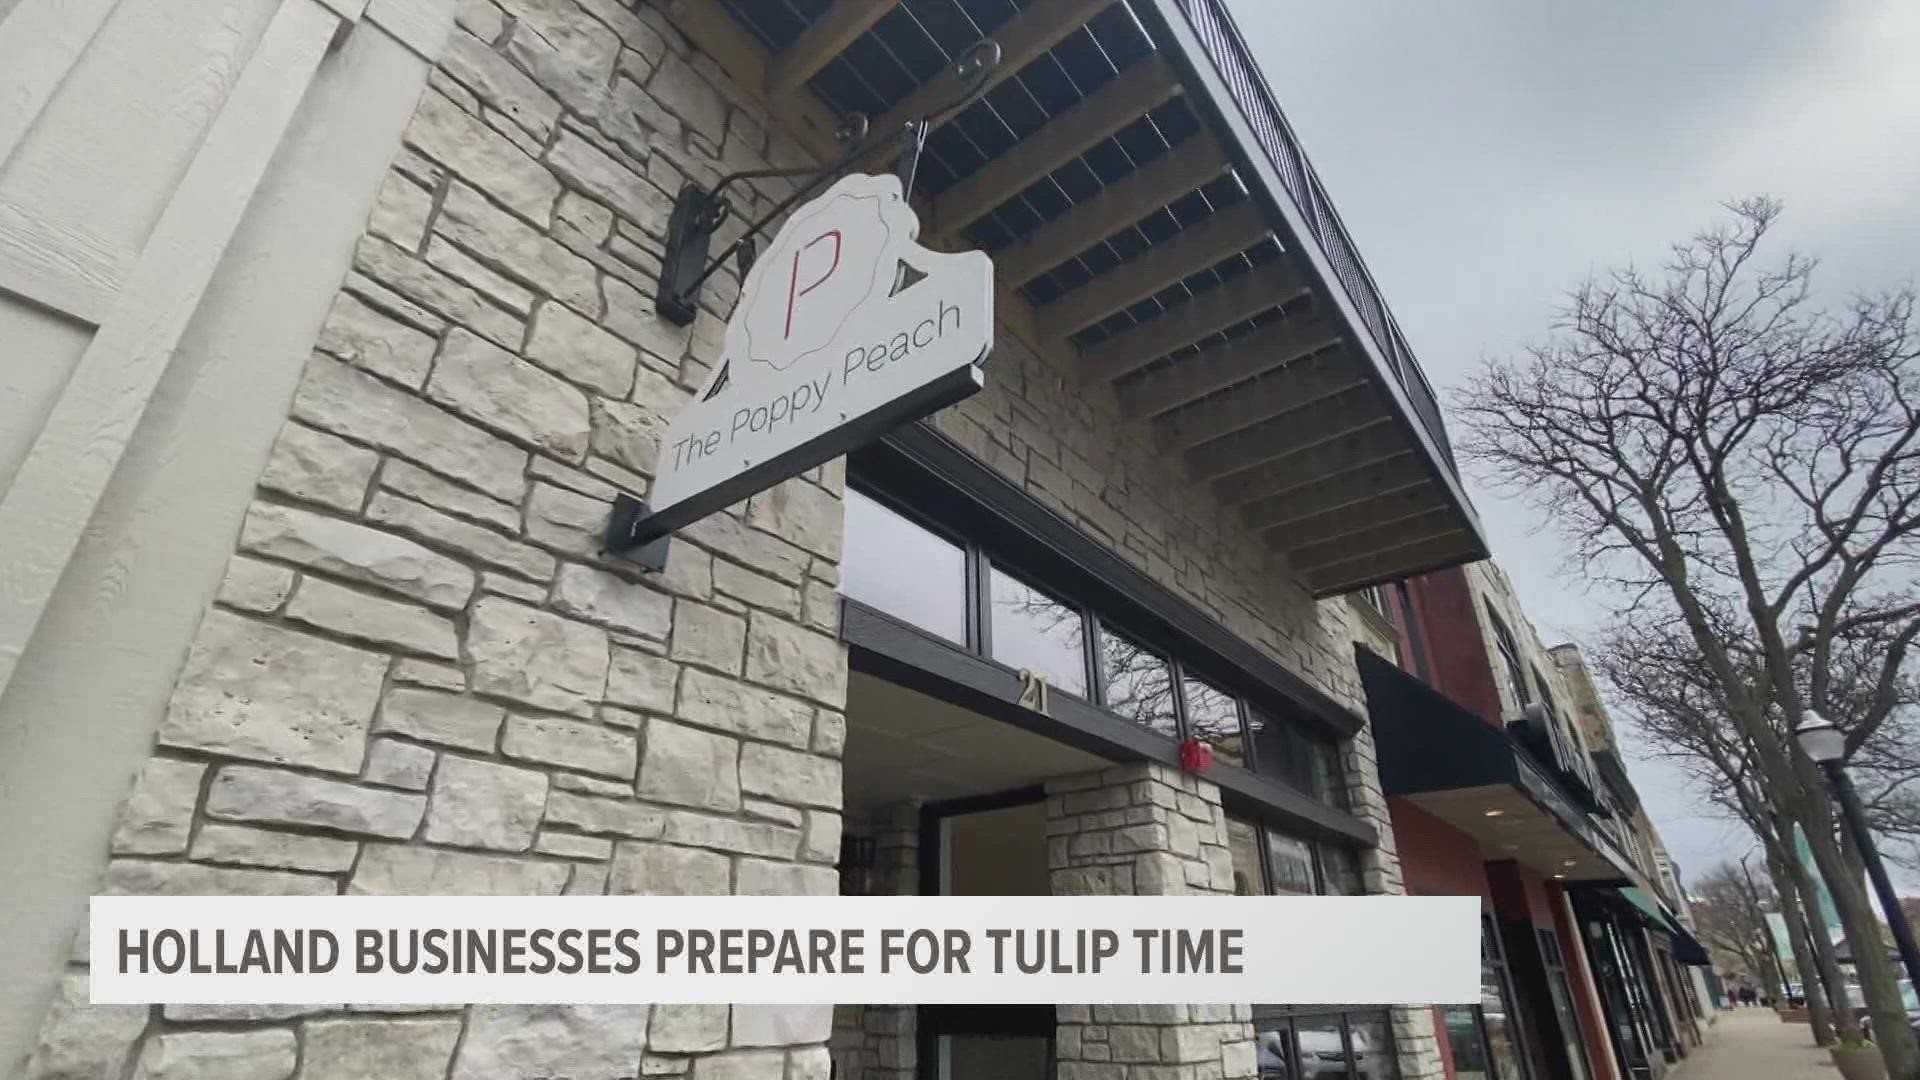 The countdown to Tulip Time begins! See how these small businesses in Holland are preparing.